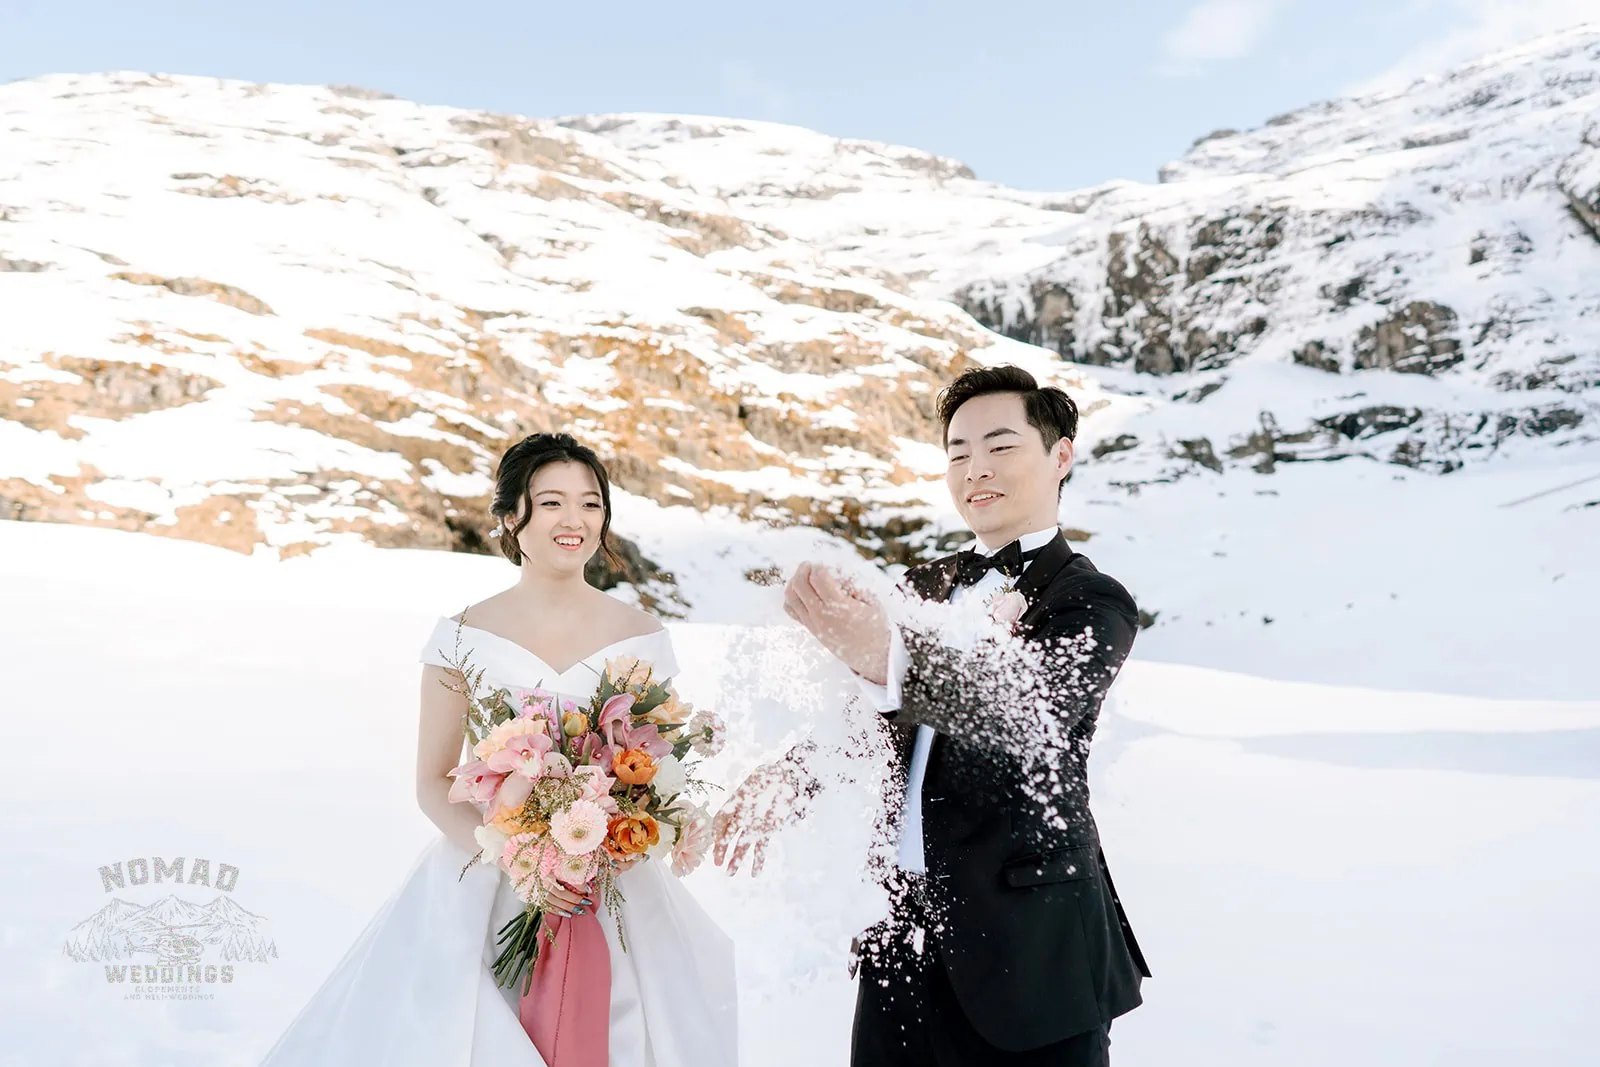 Queenstown New Zealand Elopement Wedding Photographer - Bo and Junyi having a playful snow fight during their Heli Pre Wedding Shoot.